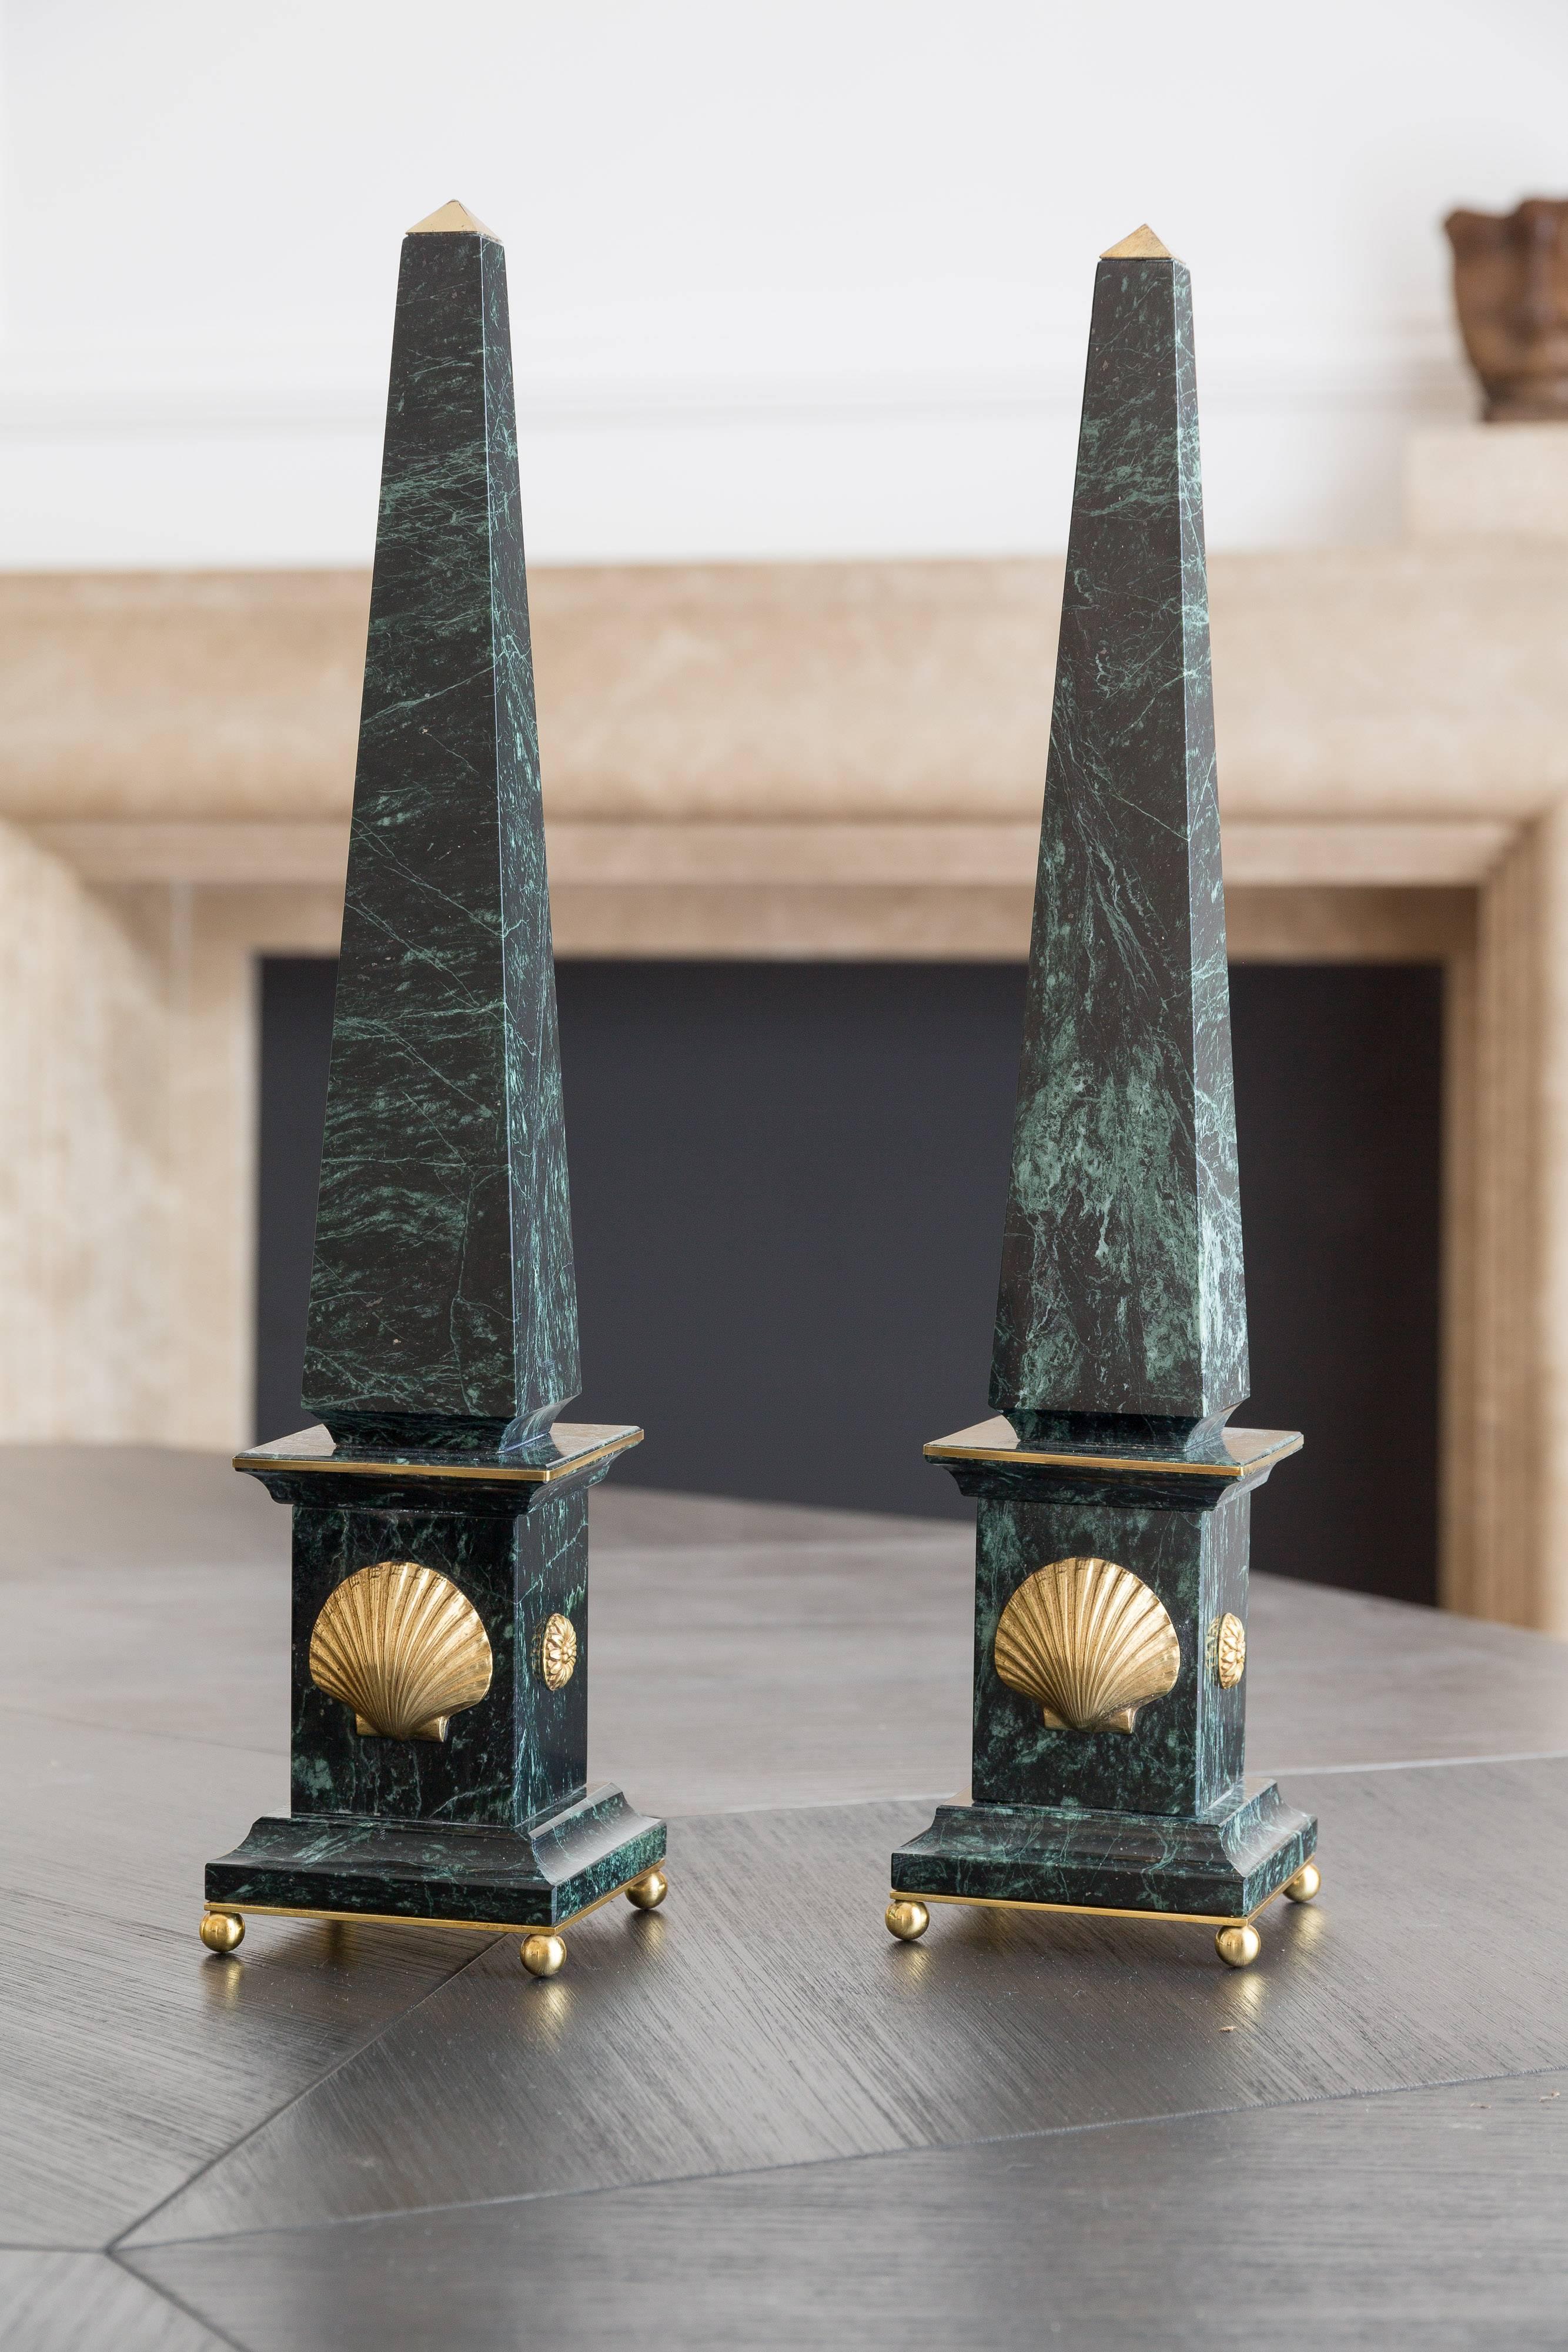 pair of italian verde alpi  marble and bronze obelisks "VENERE"  -grand tour collection- produced by Lorenzo Ciompi, 2017 
designed, produced and executed directly in exclusivity for COMPENDIO GALLERY on limited edition of 10 
extremely